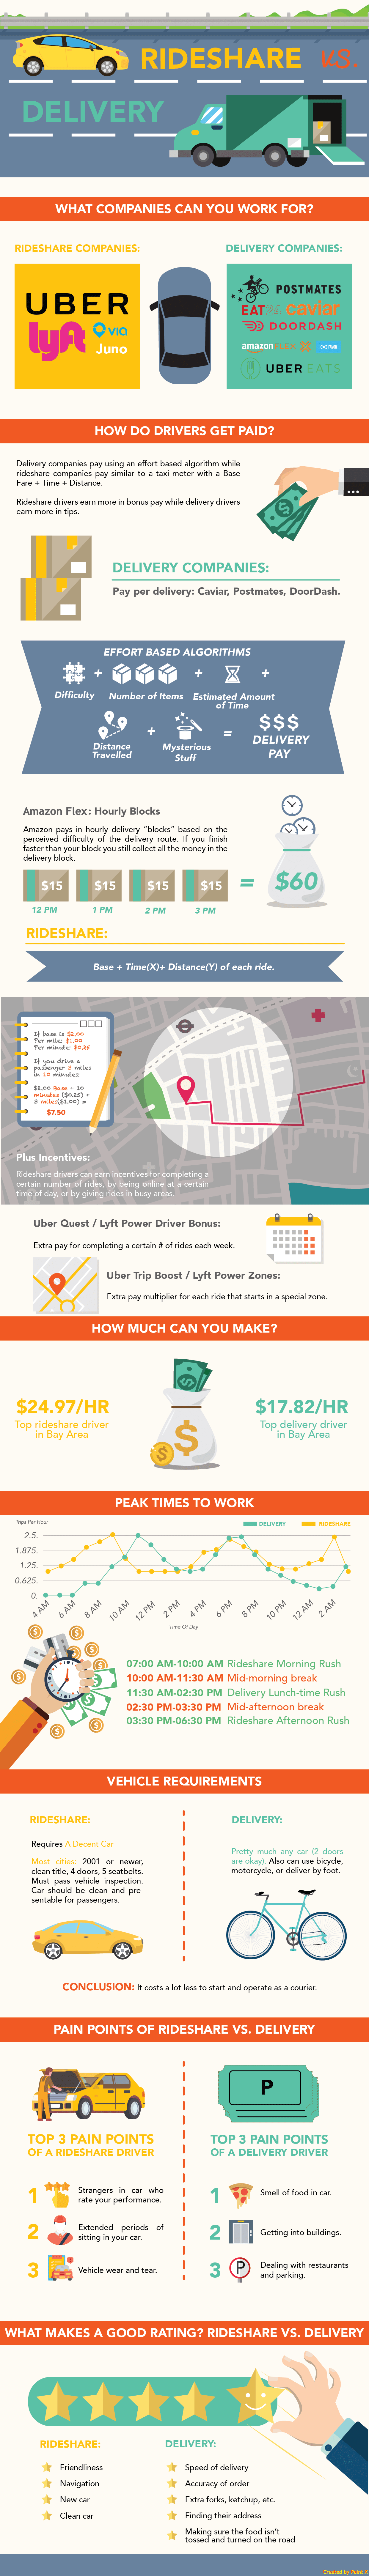 Rideshare vs. Delivery Infographic